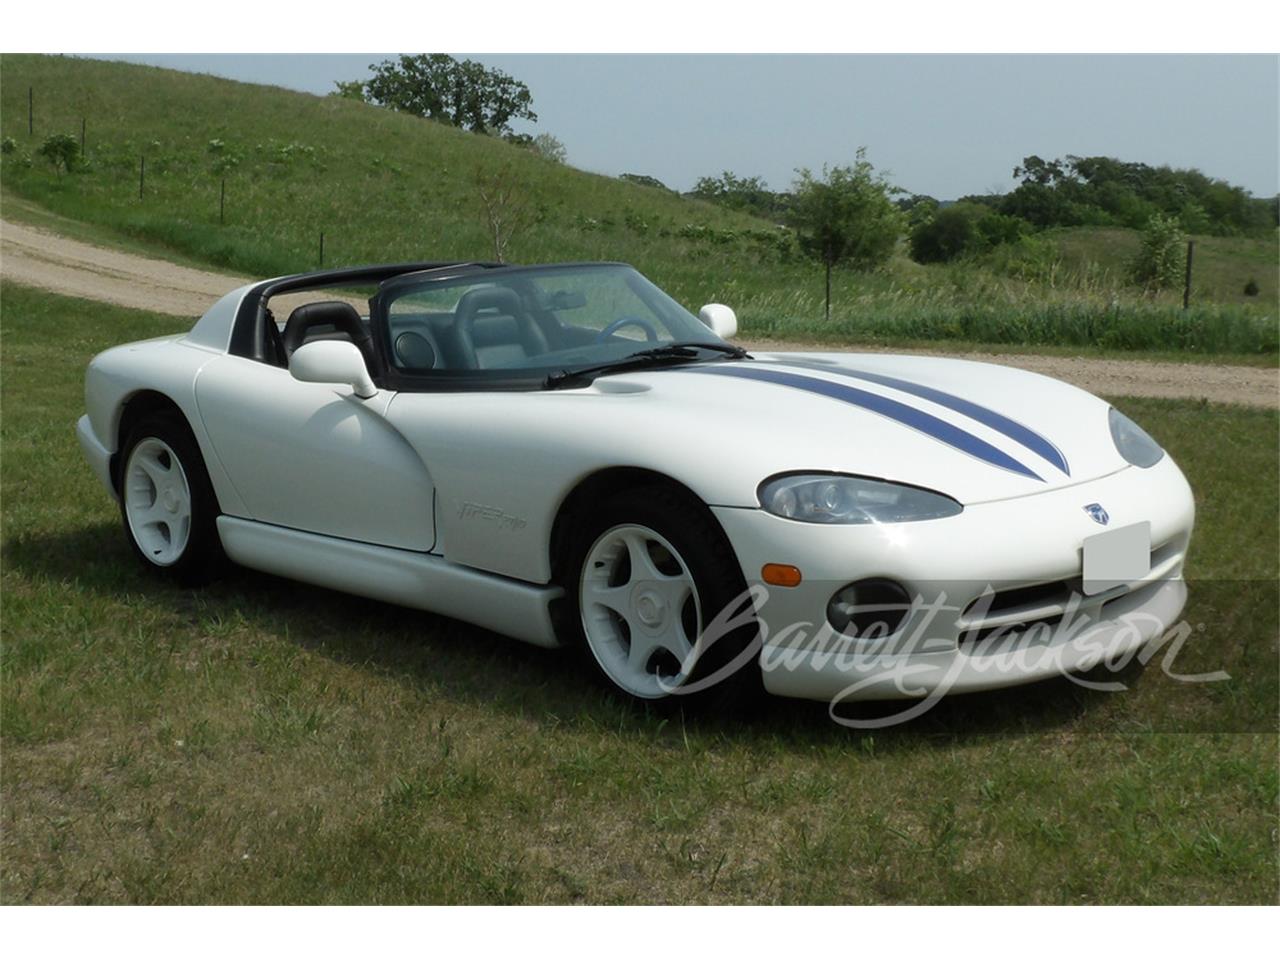 For Sale at Auction: 1996 Dodge Viper in Scottsdale, Arizona for sale in Scottsdale, AZ